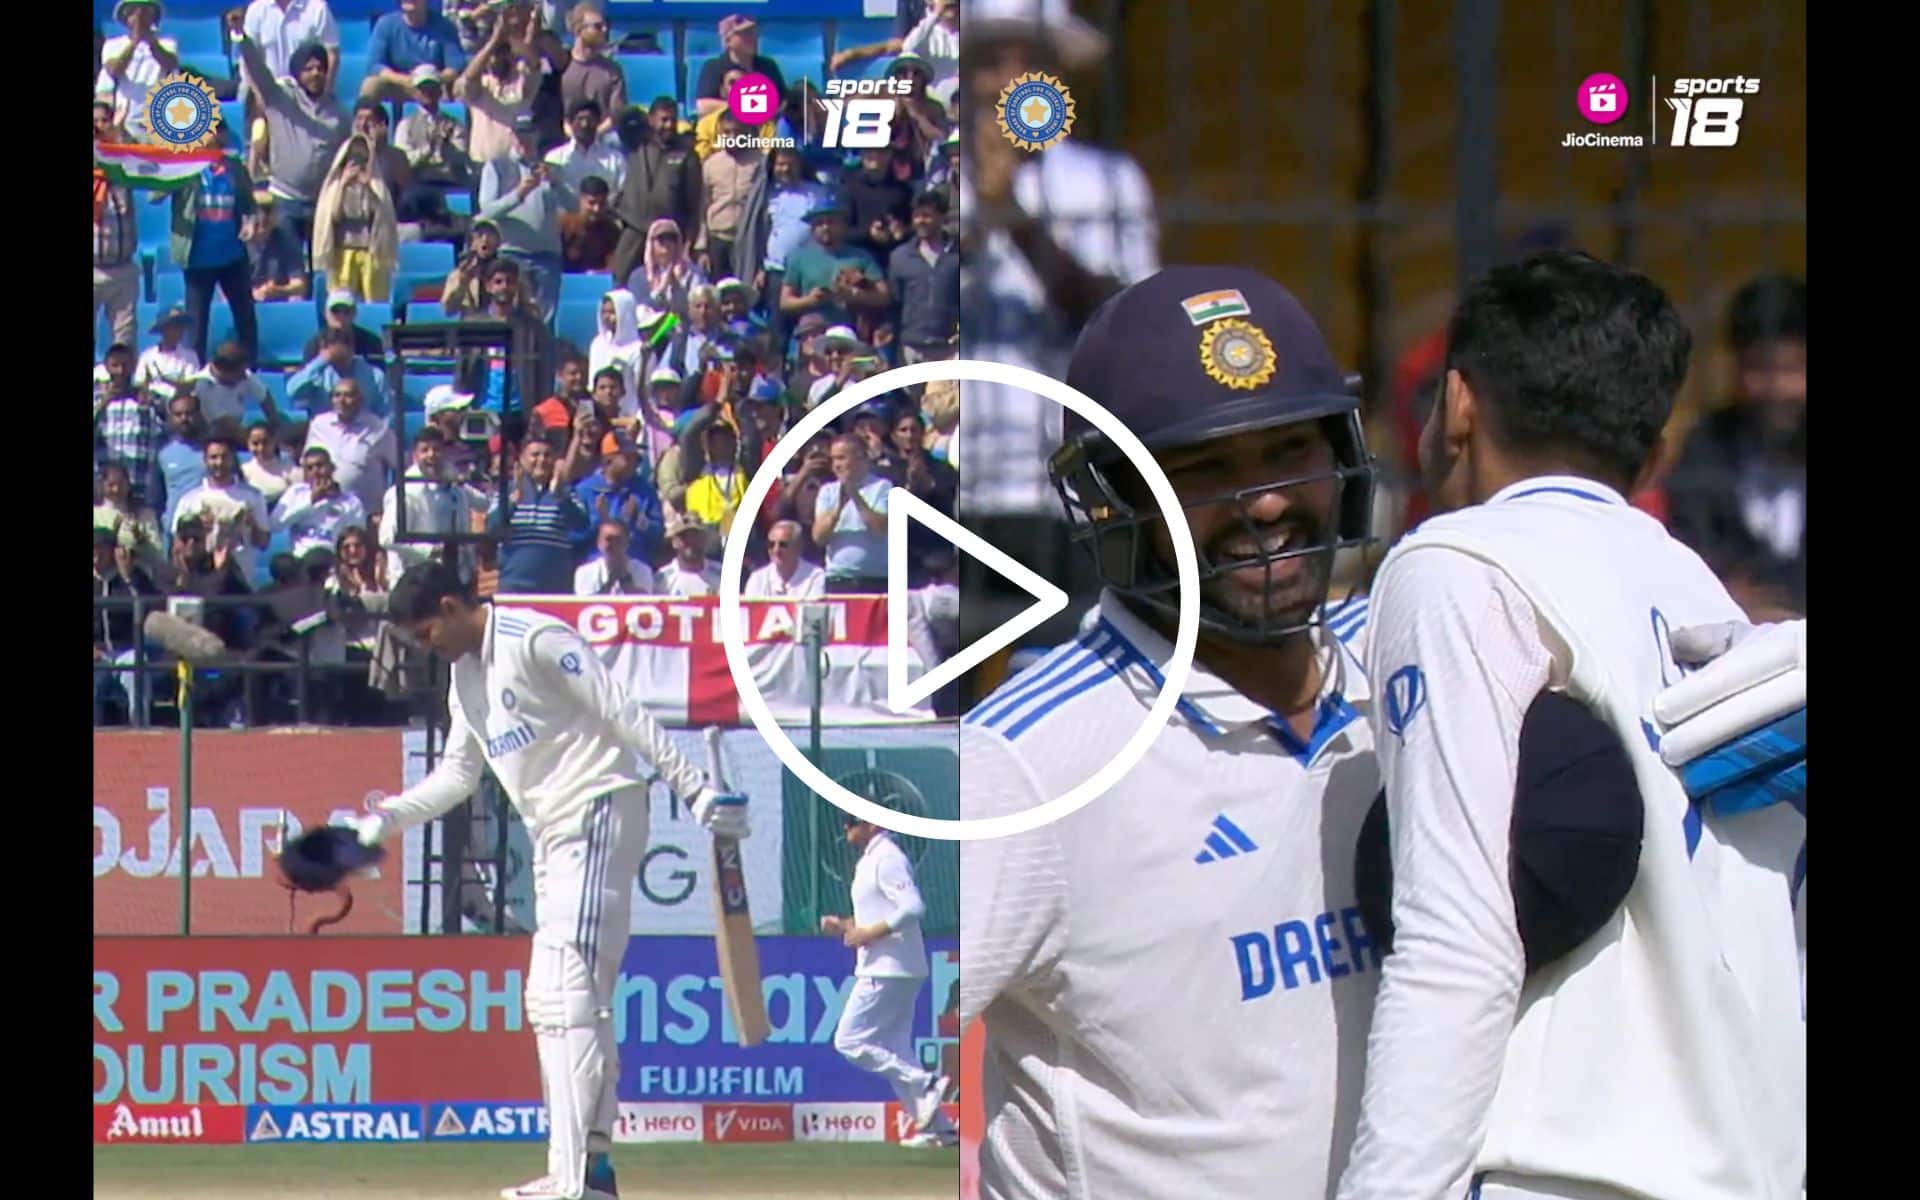 [Watch] Shubman Gill Smashes Shoaib Bashir for 'Stunning' Four to Bring Up 4th Test Century